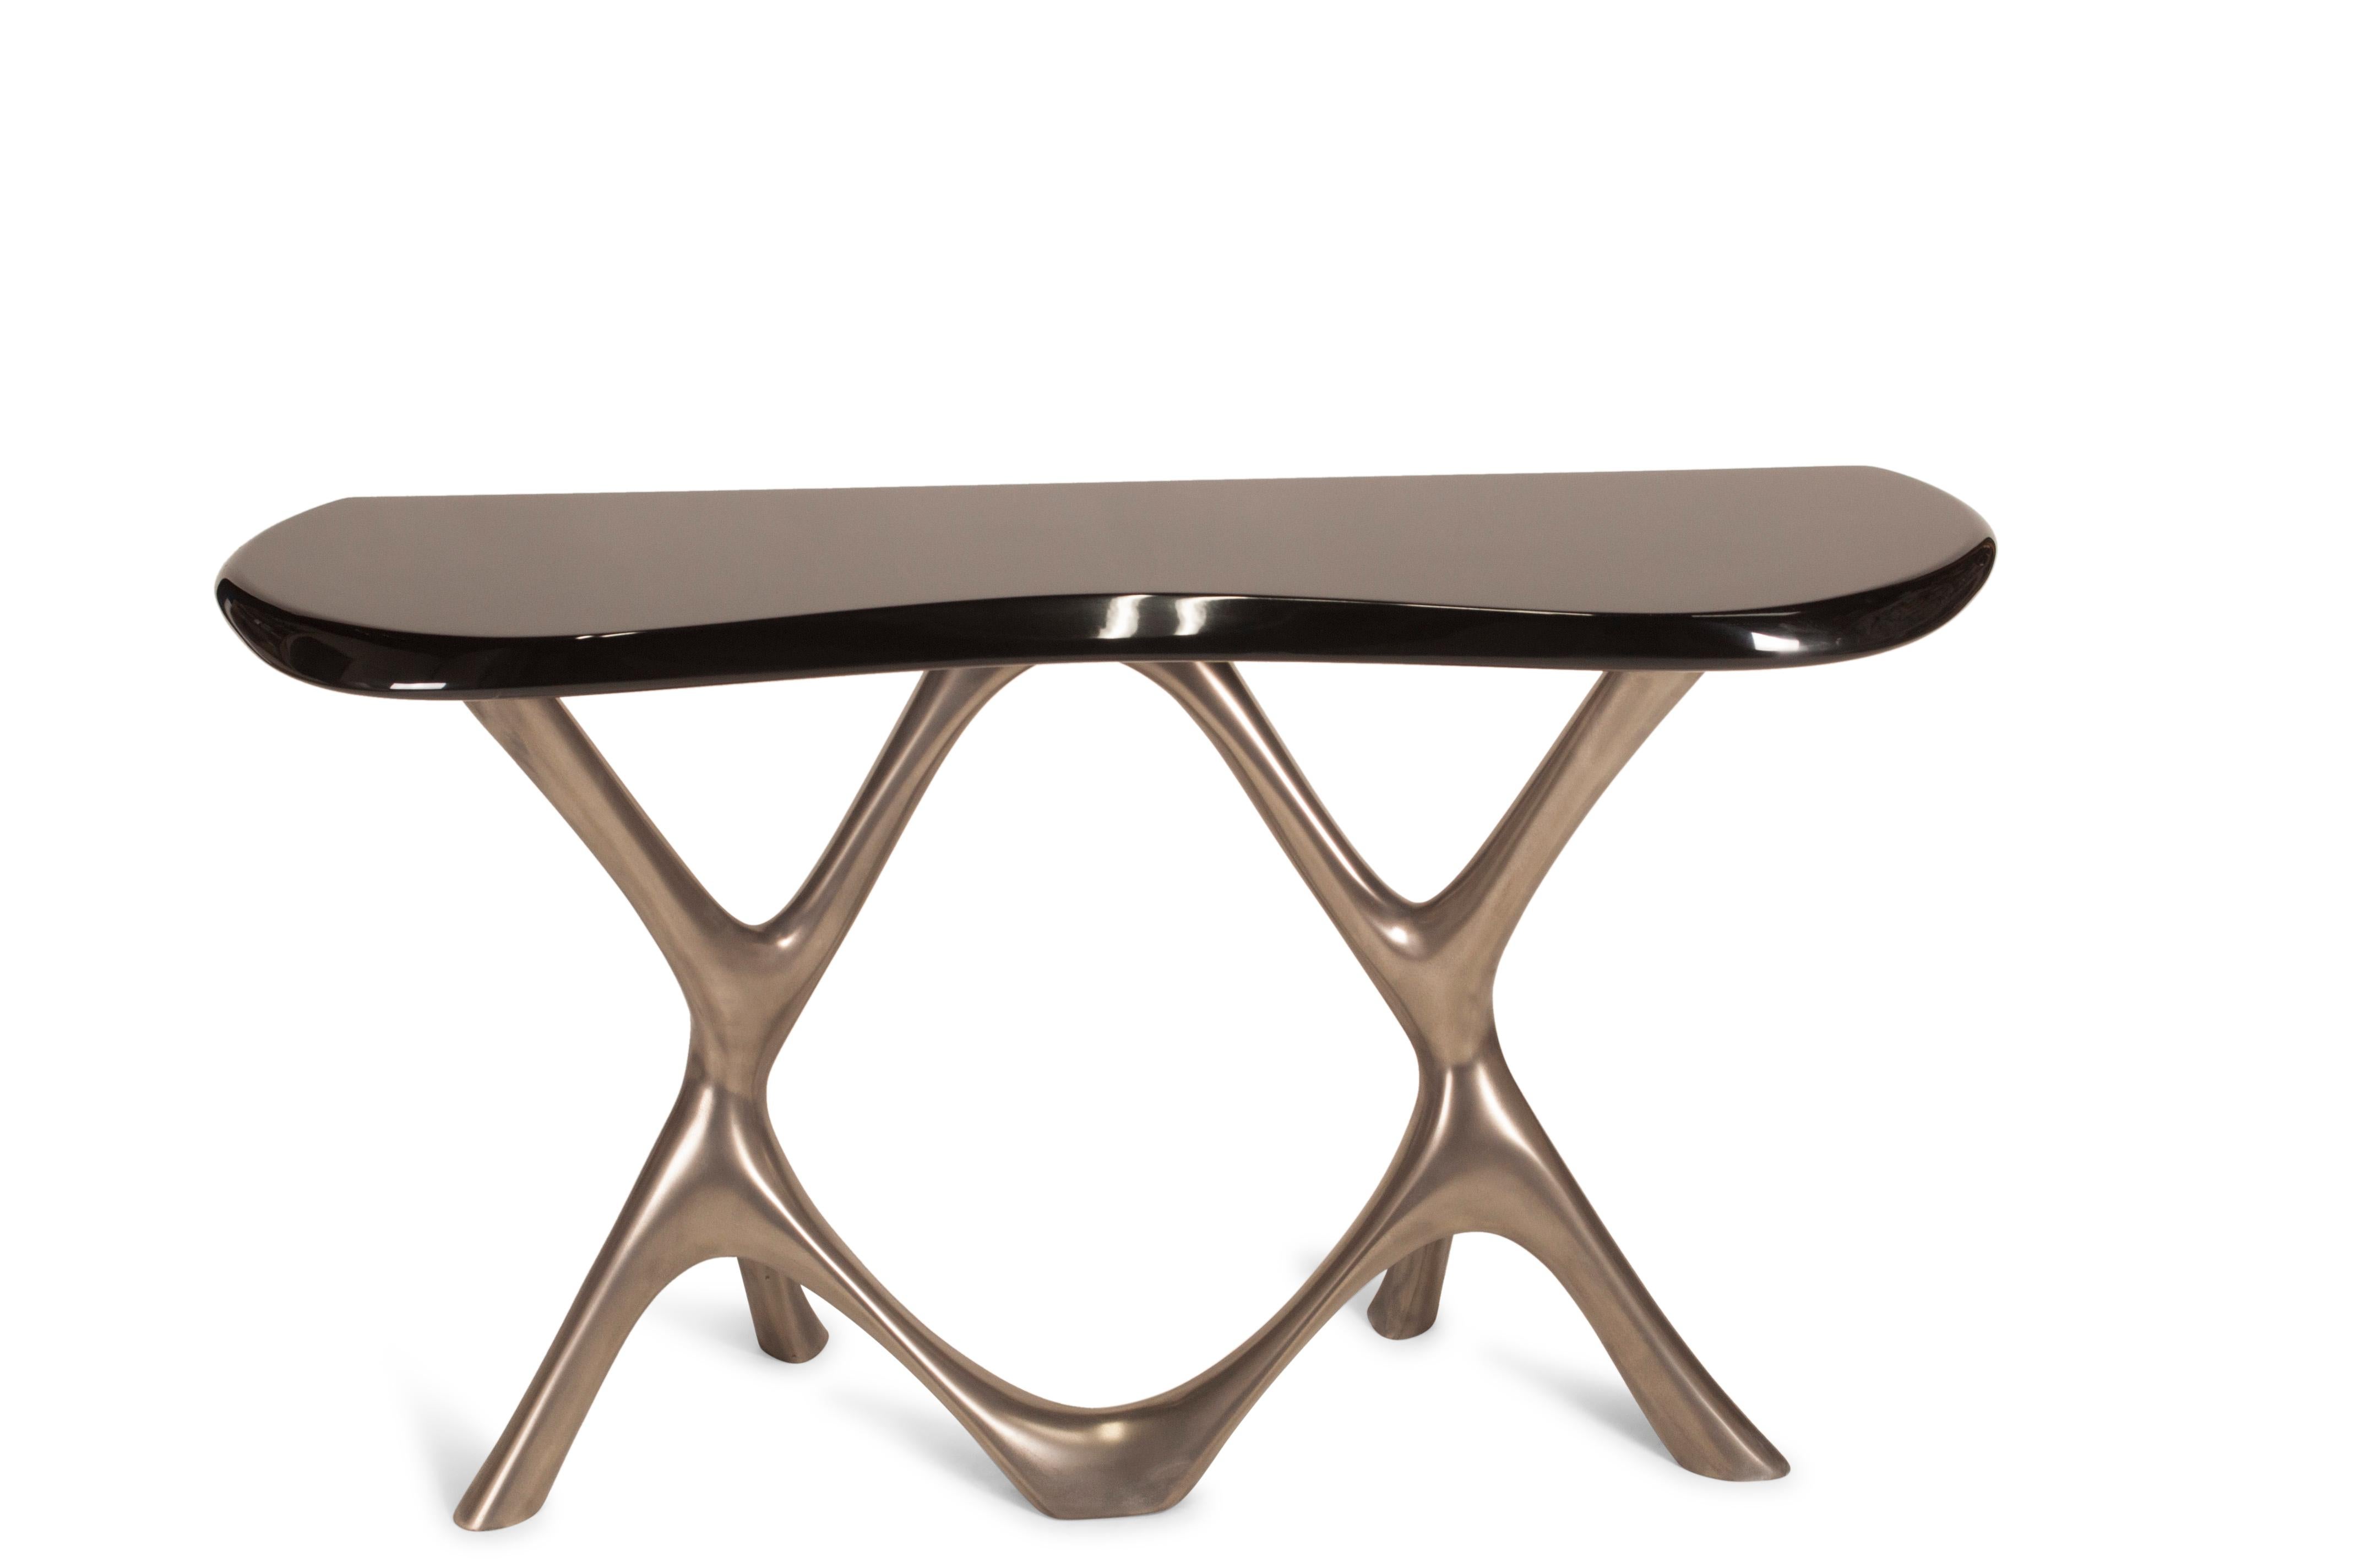 Modern Amorph Avatar Console Table in Nickel Finish with Black Lacquer